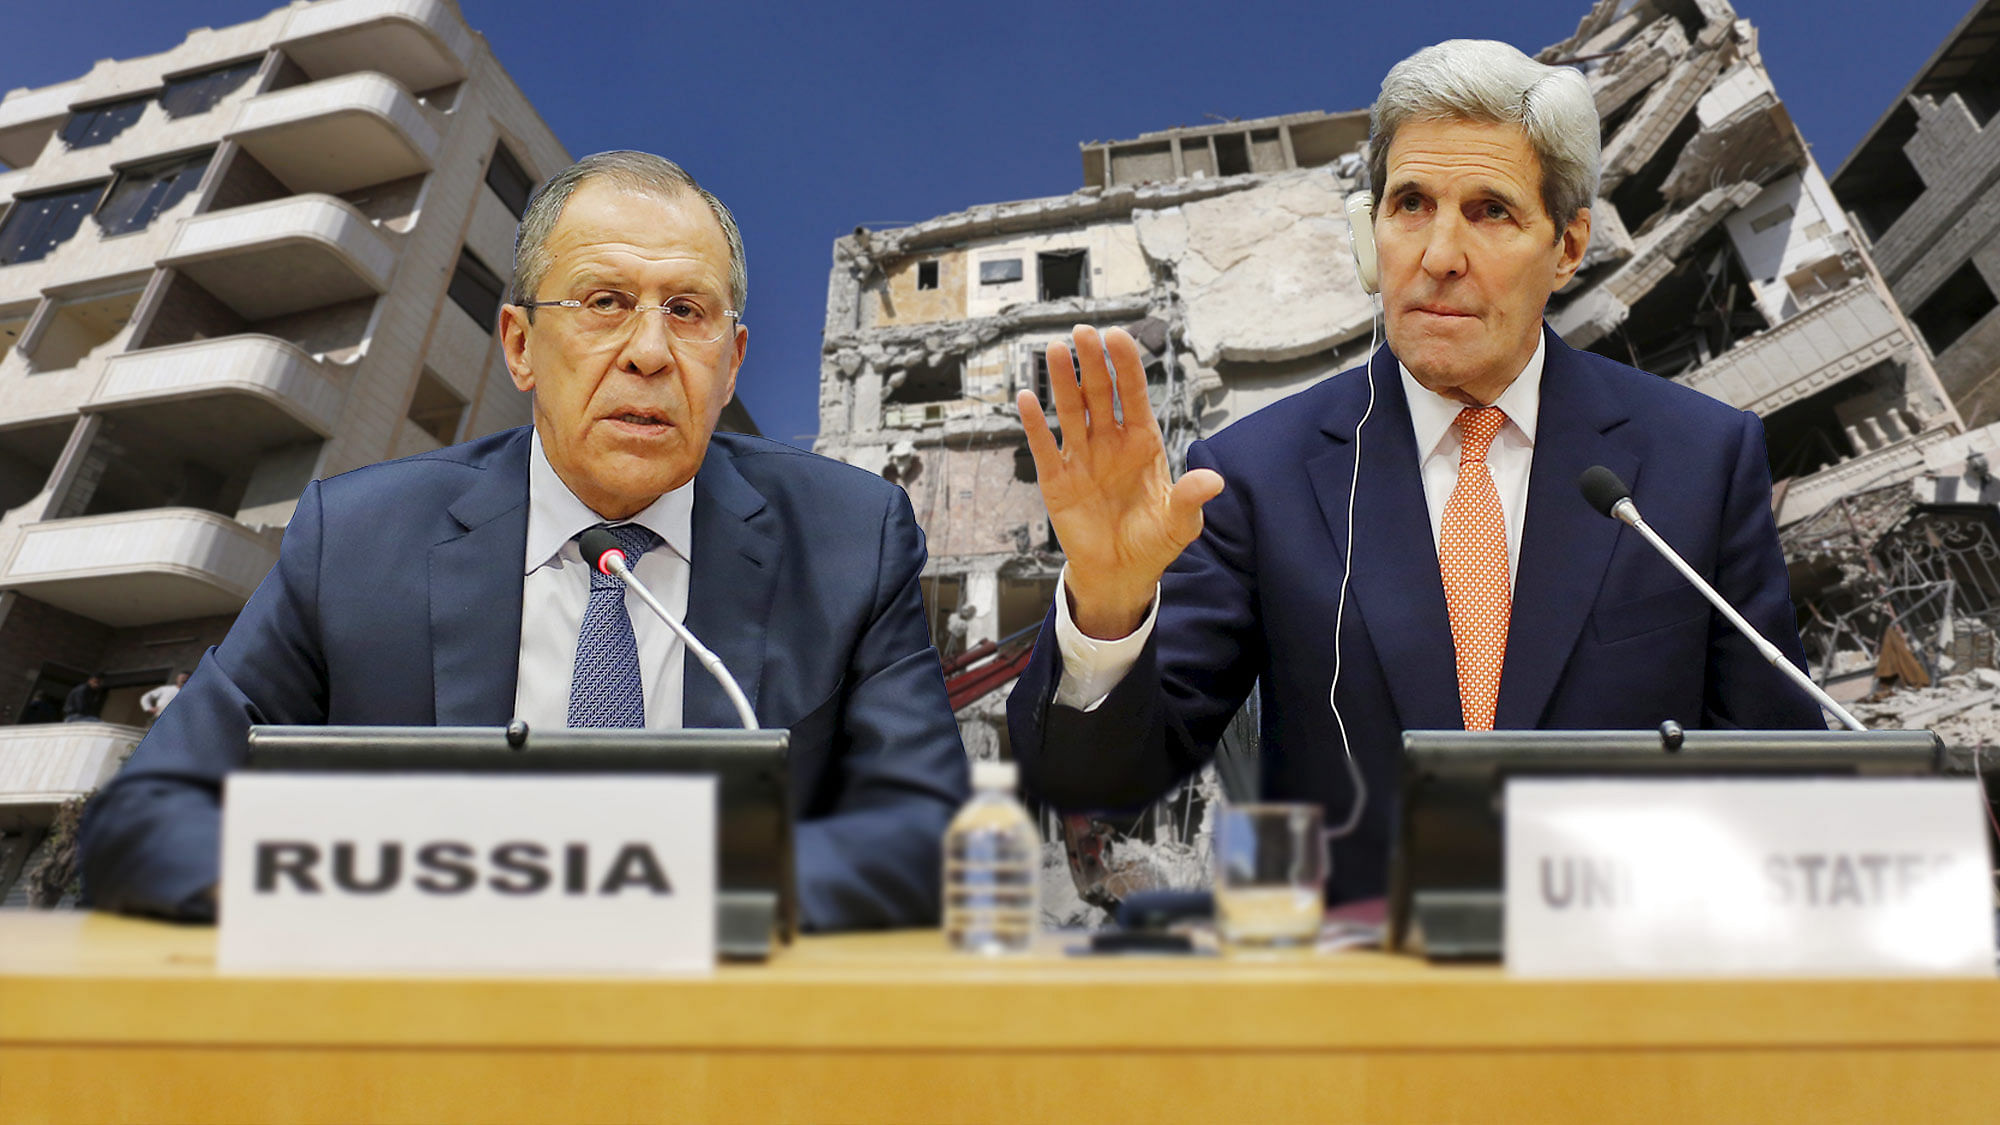 Russian Foreign Minister Sergey Lavrov with US Foreign Secretary John Kerry (right). (Photo: <b>The Quint</b>)